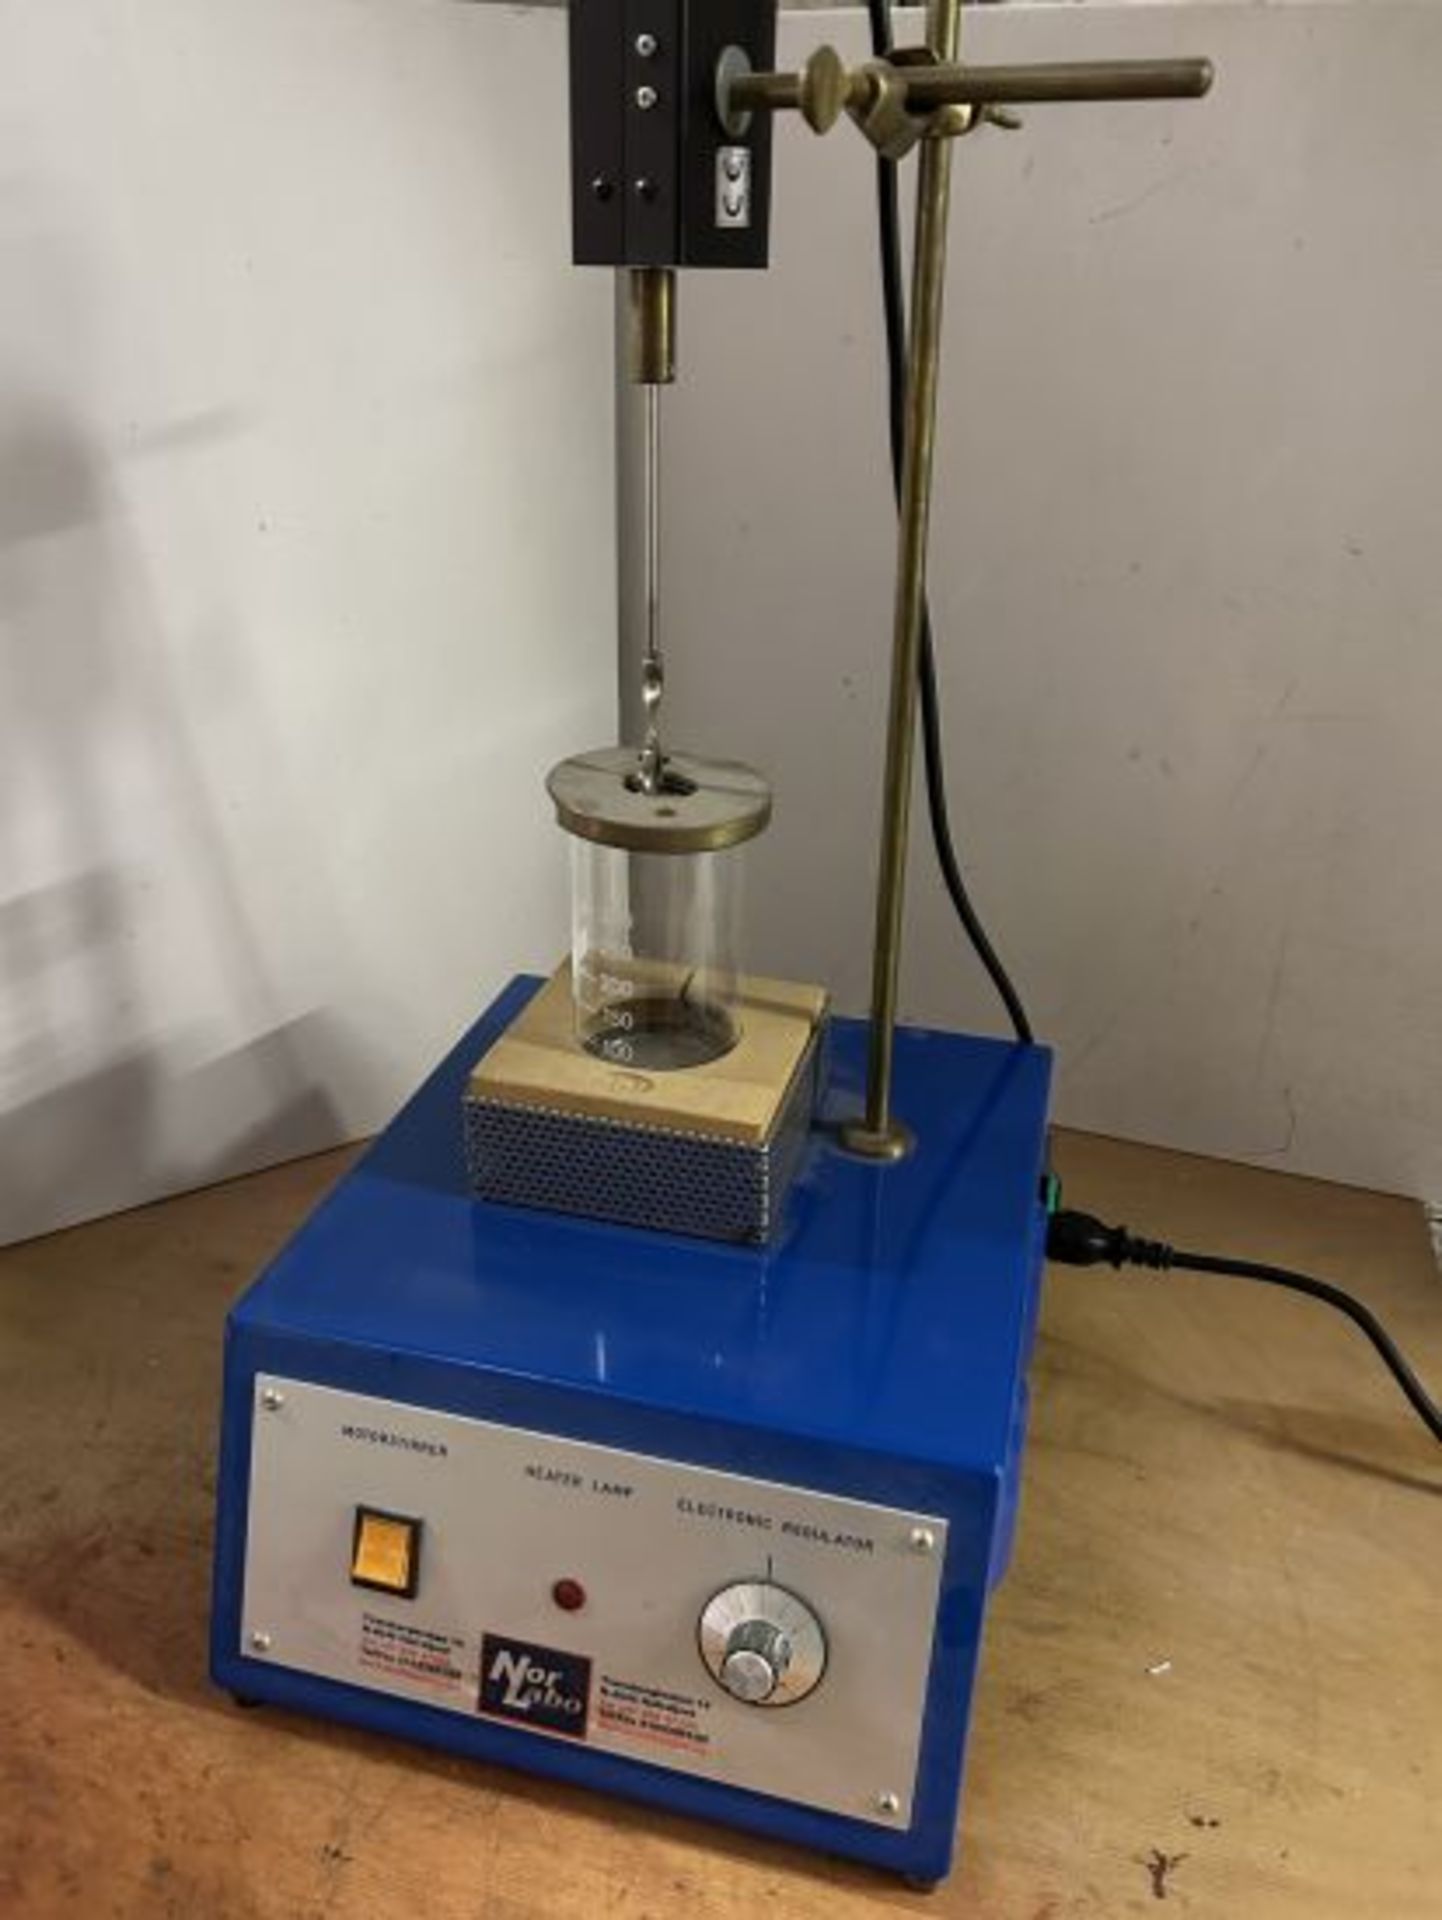 Nor Labo Stirrer with Heater Lamp.